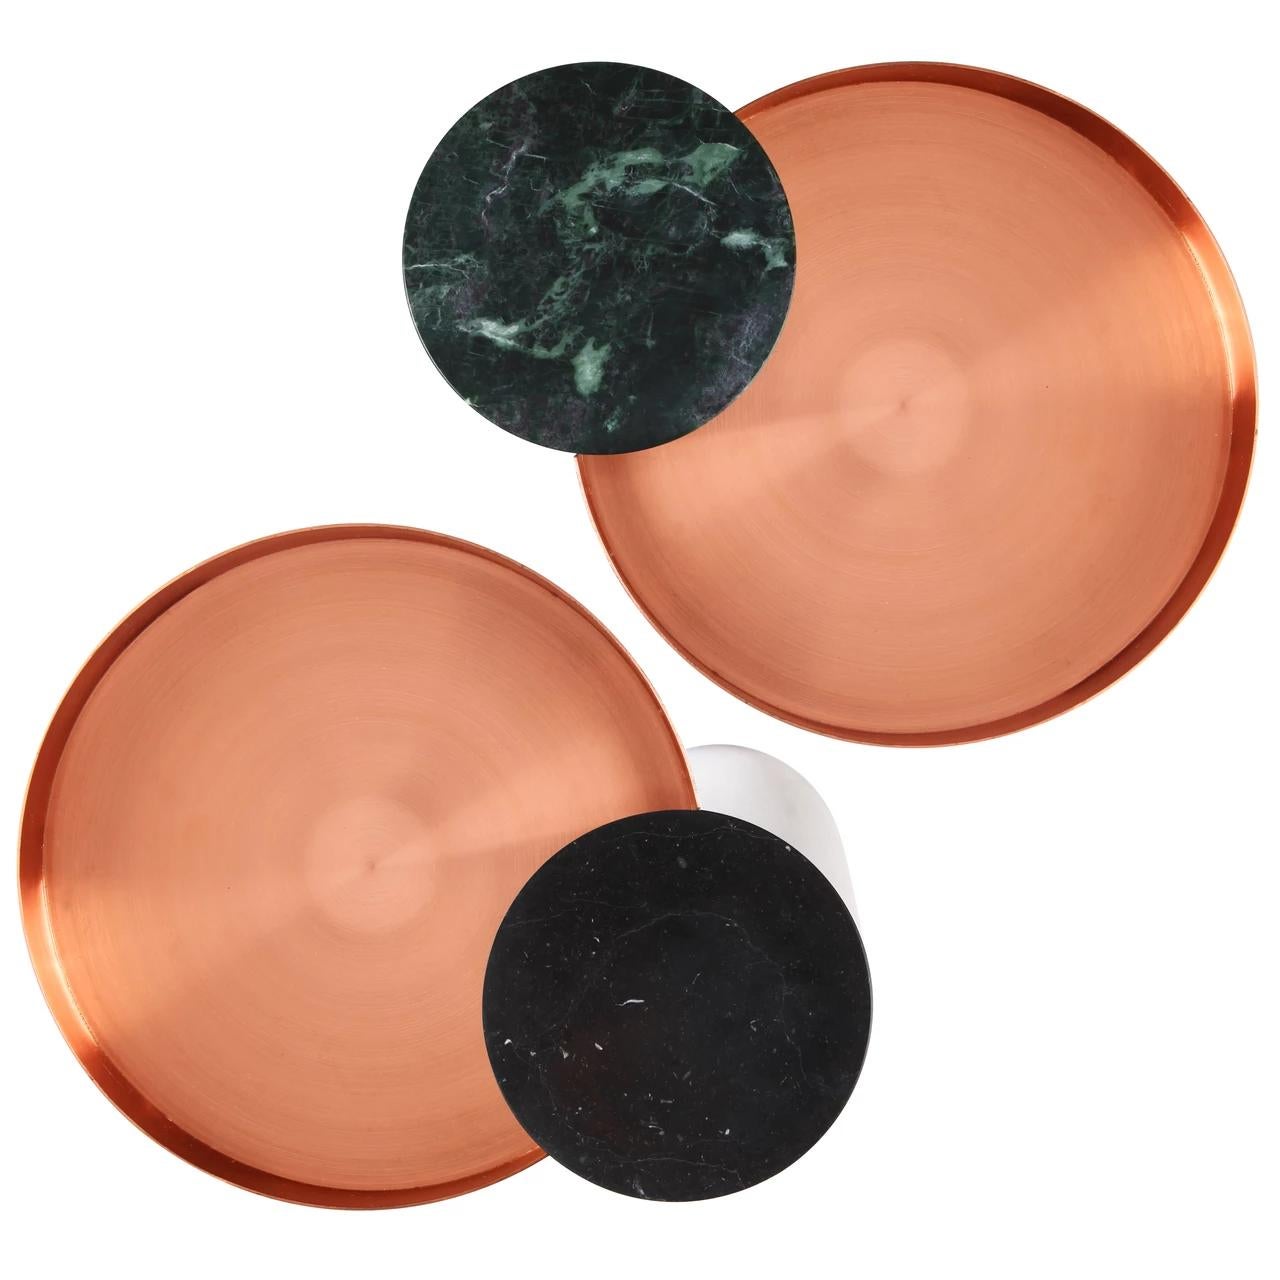 Pair of contemporary Gueridons, Sebastian Herkner

The salute table exists in 3 sizes, 3 different marbles for the column and 4 different finishes for the tray for a virtually endless number of configurations. In addition, Salute can be made bespoke